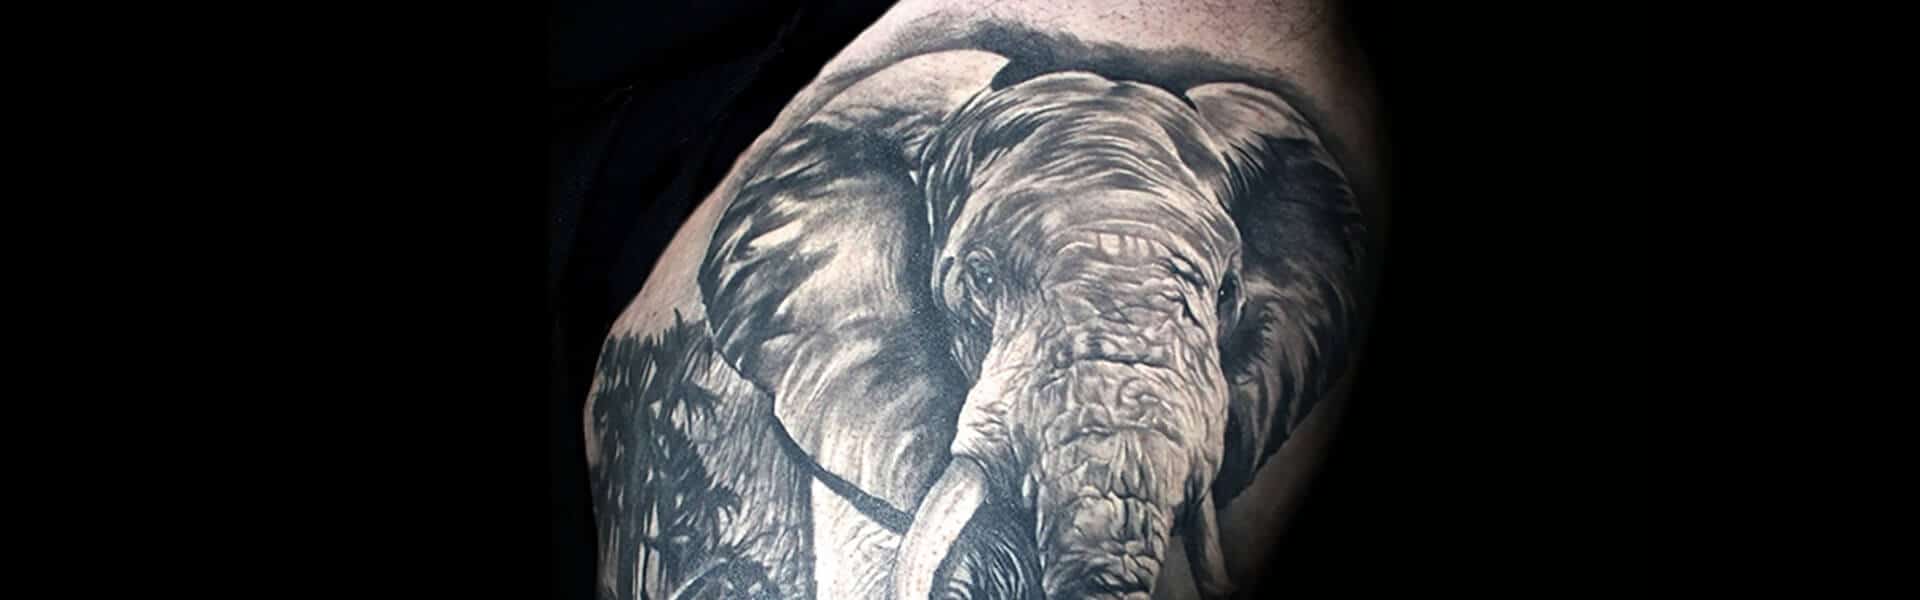 WHAT DOES AN ELEPHANT TATTOO SYMBOLIZE? - SKIN DESIGN TATTOO